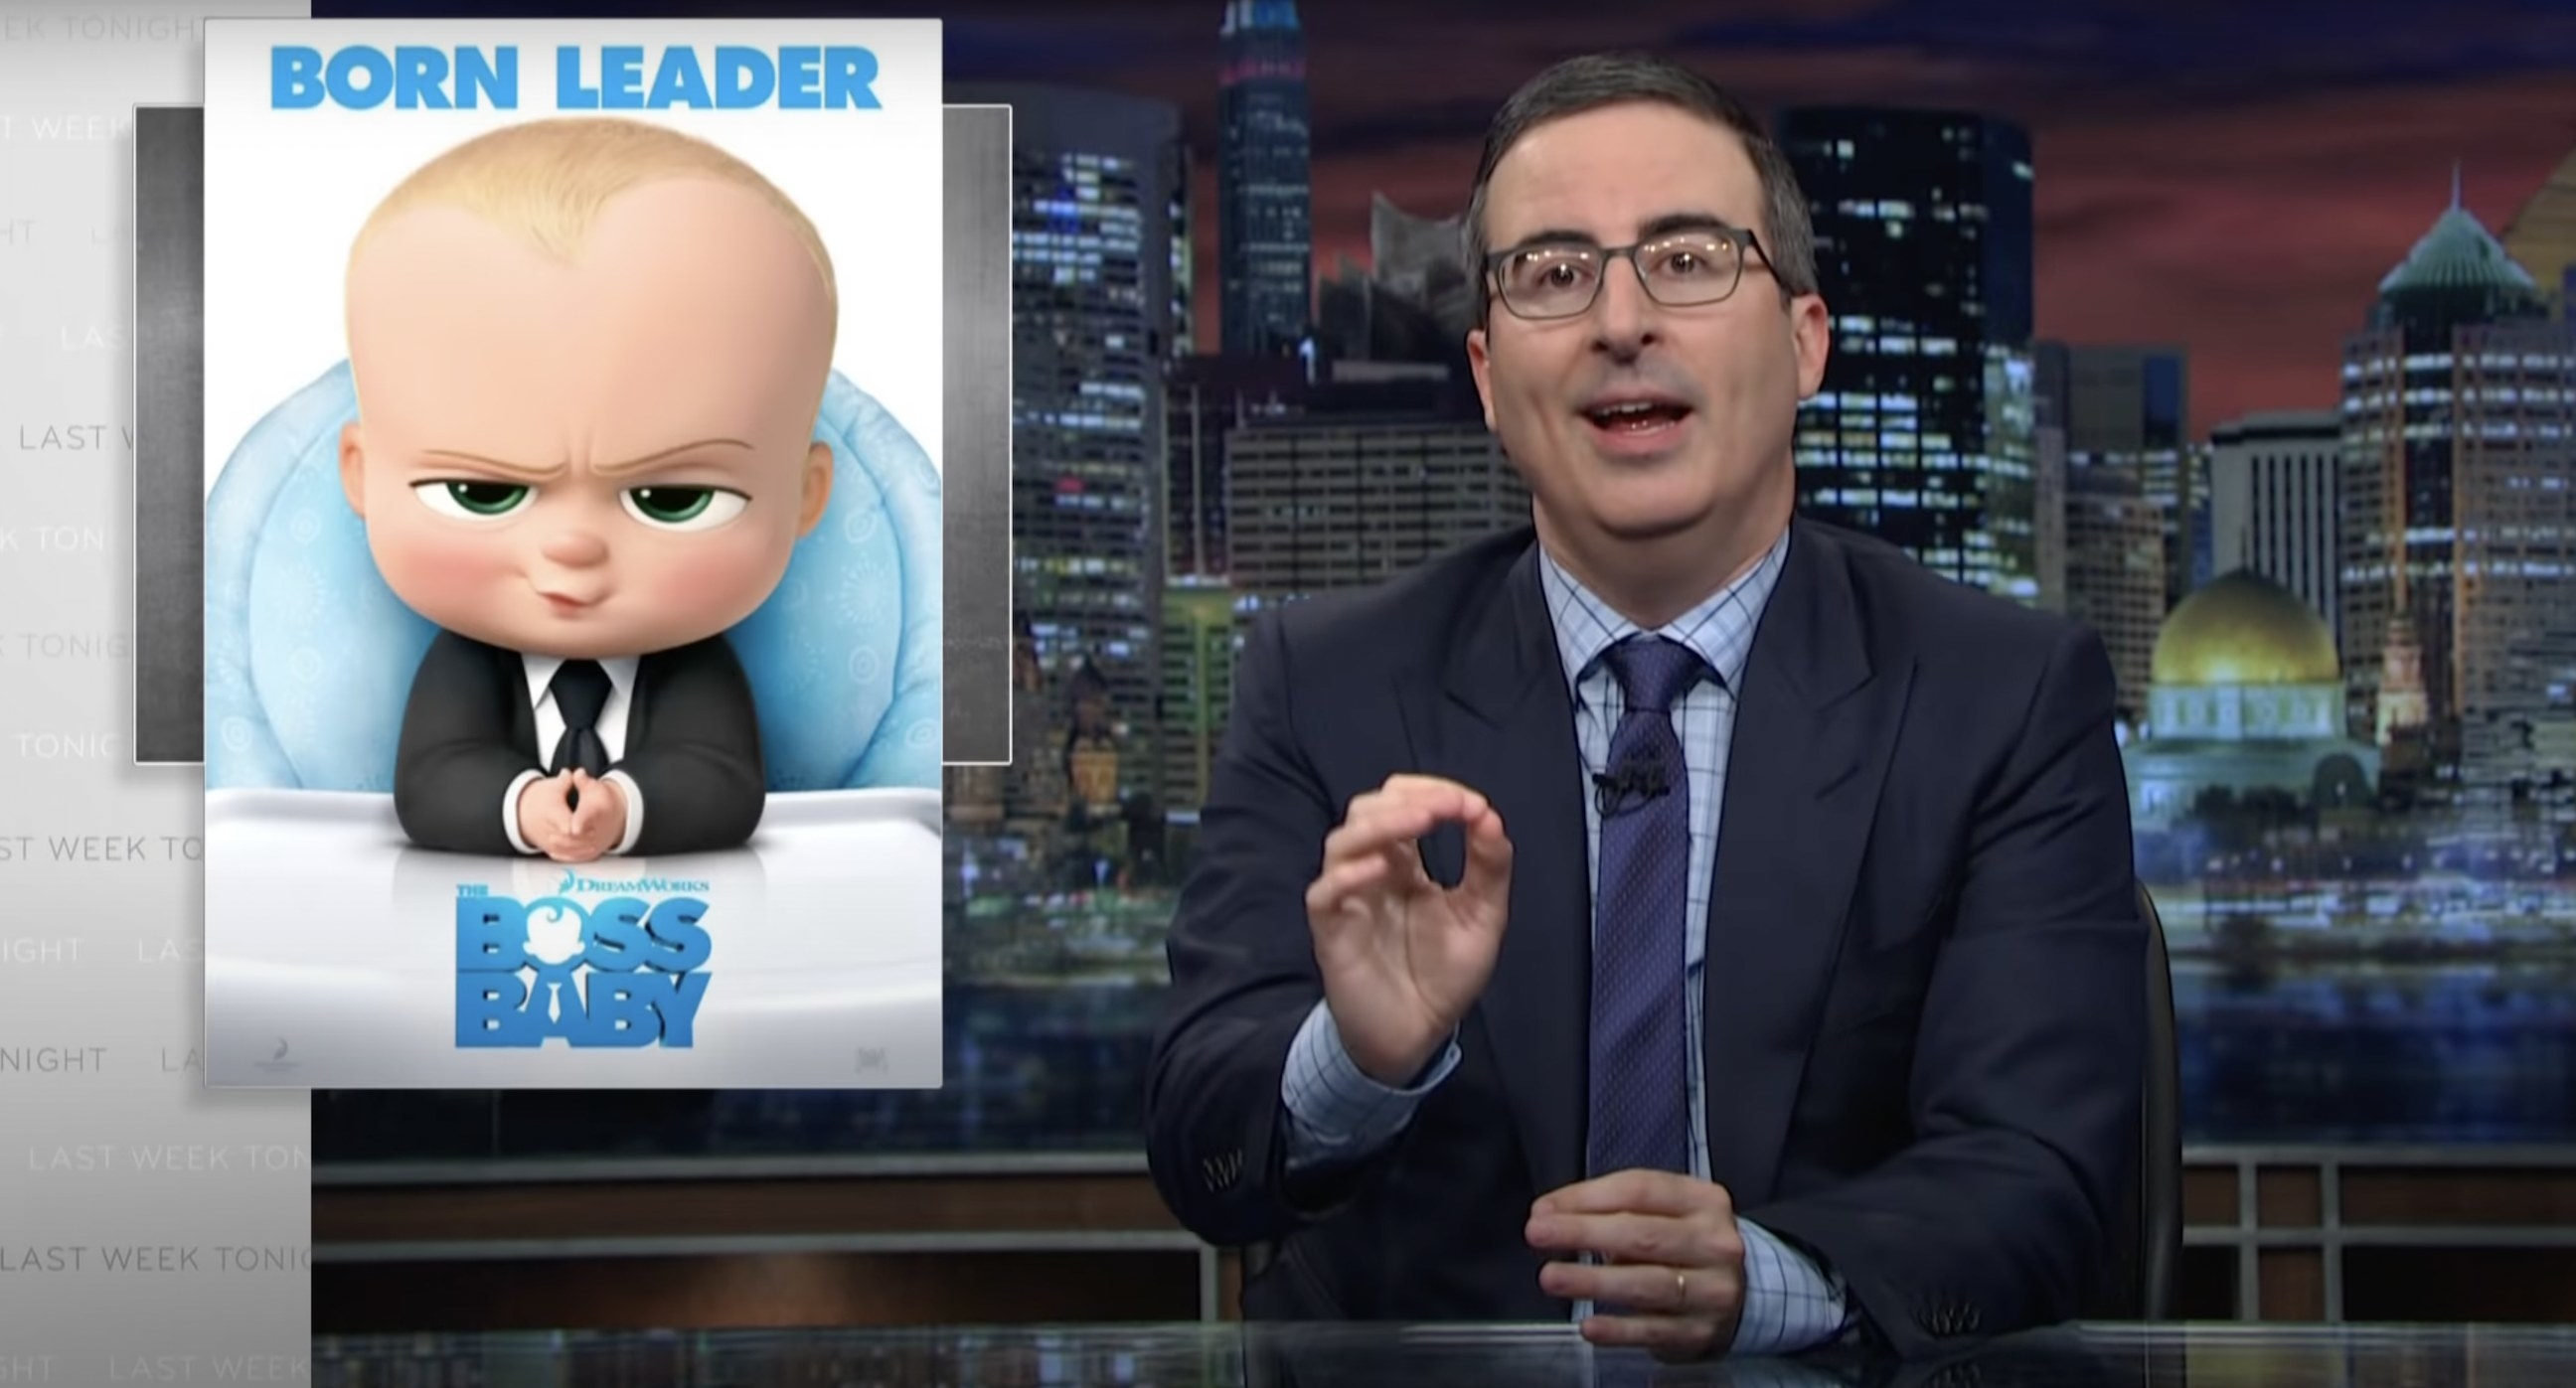 John Oliver at his desk with an image of the Bossy Baby poster next to him